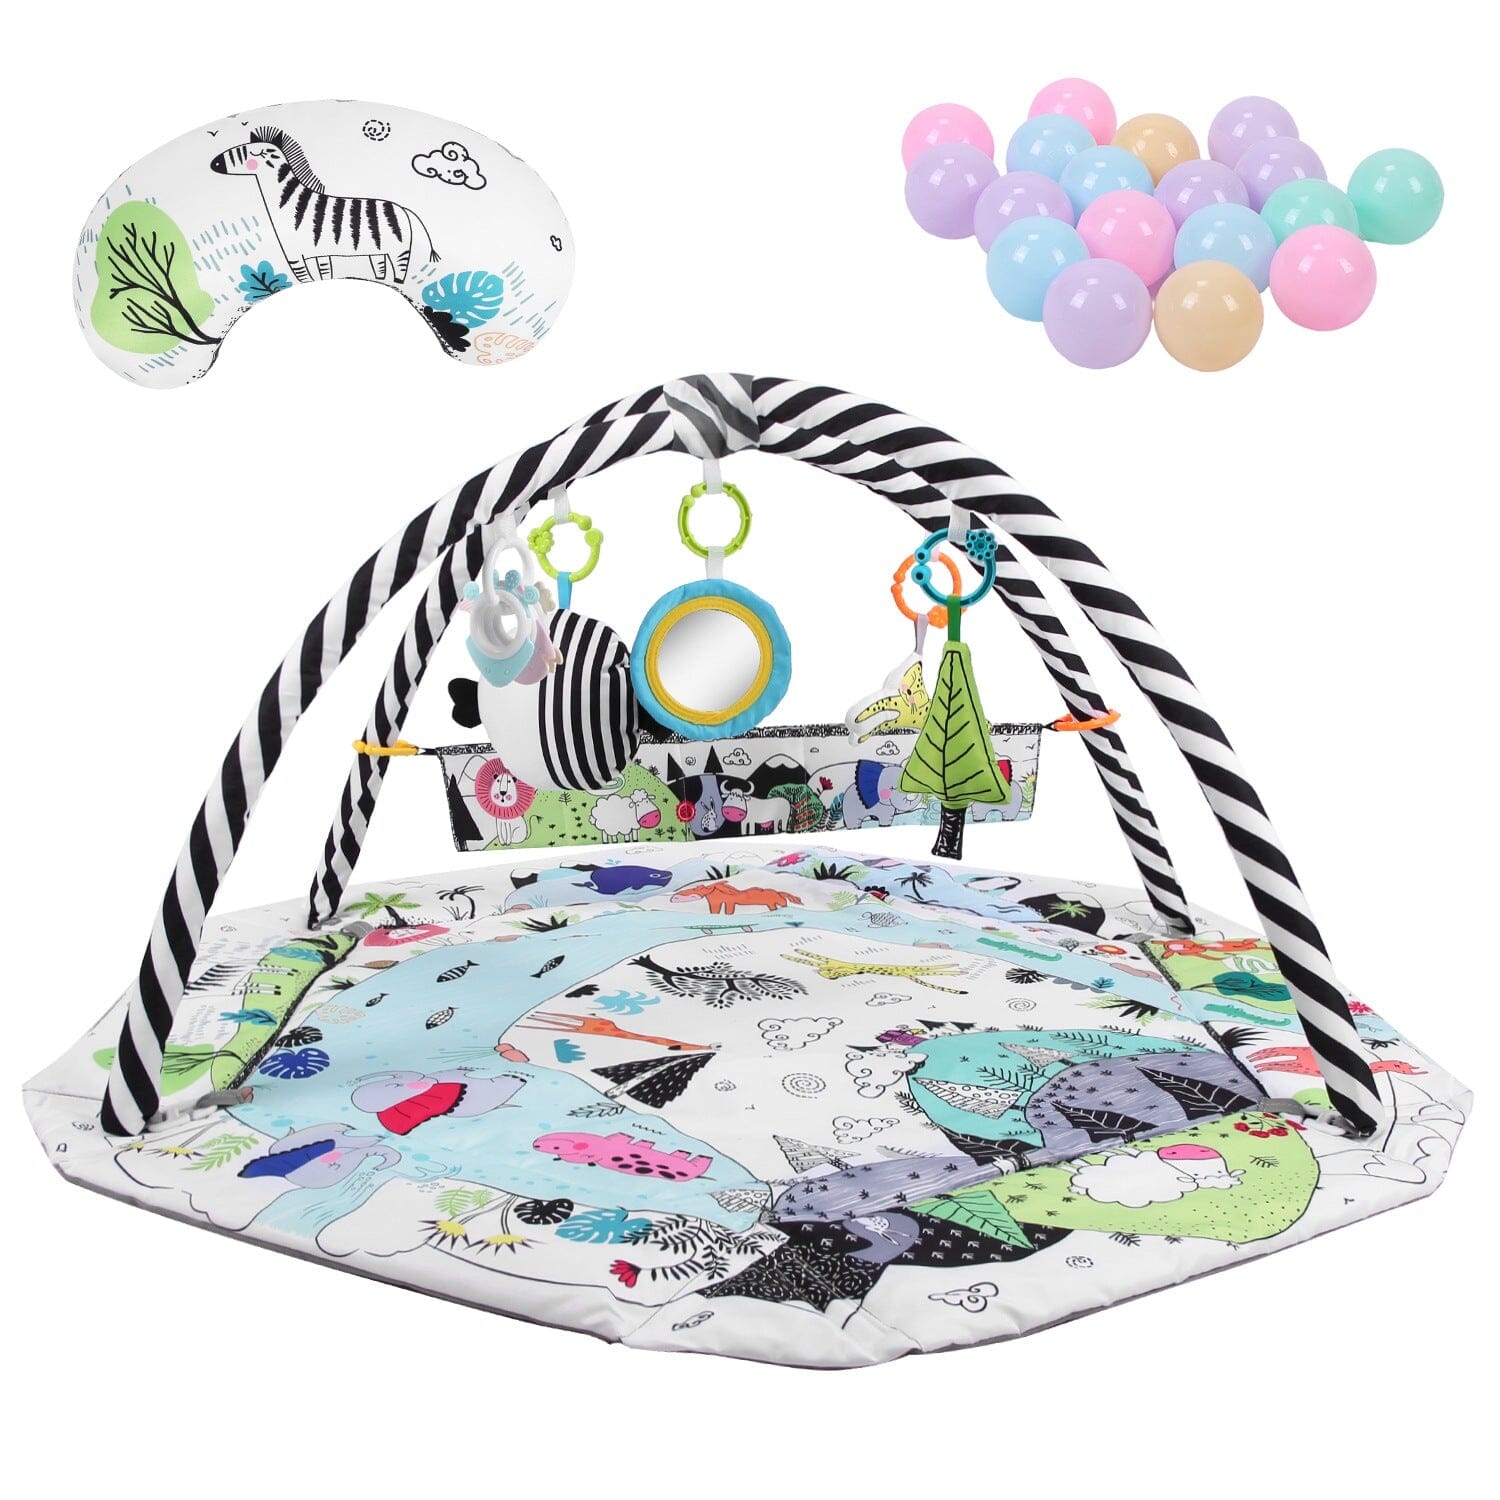 4-in-1 Baby Gym Play Mat Ball Pit with Pillow 18 Balls 9 Toys for 0-3 Years Old